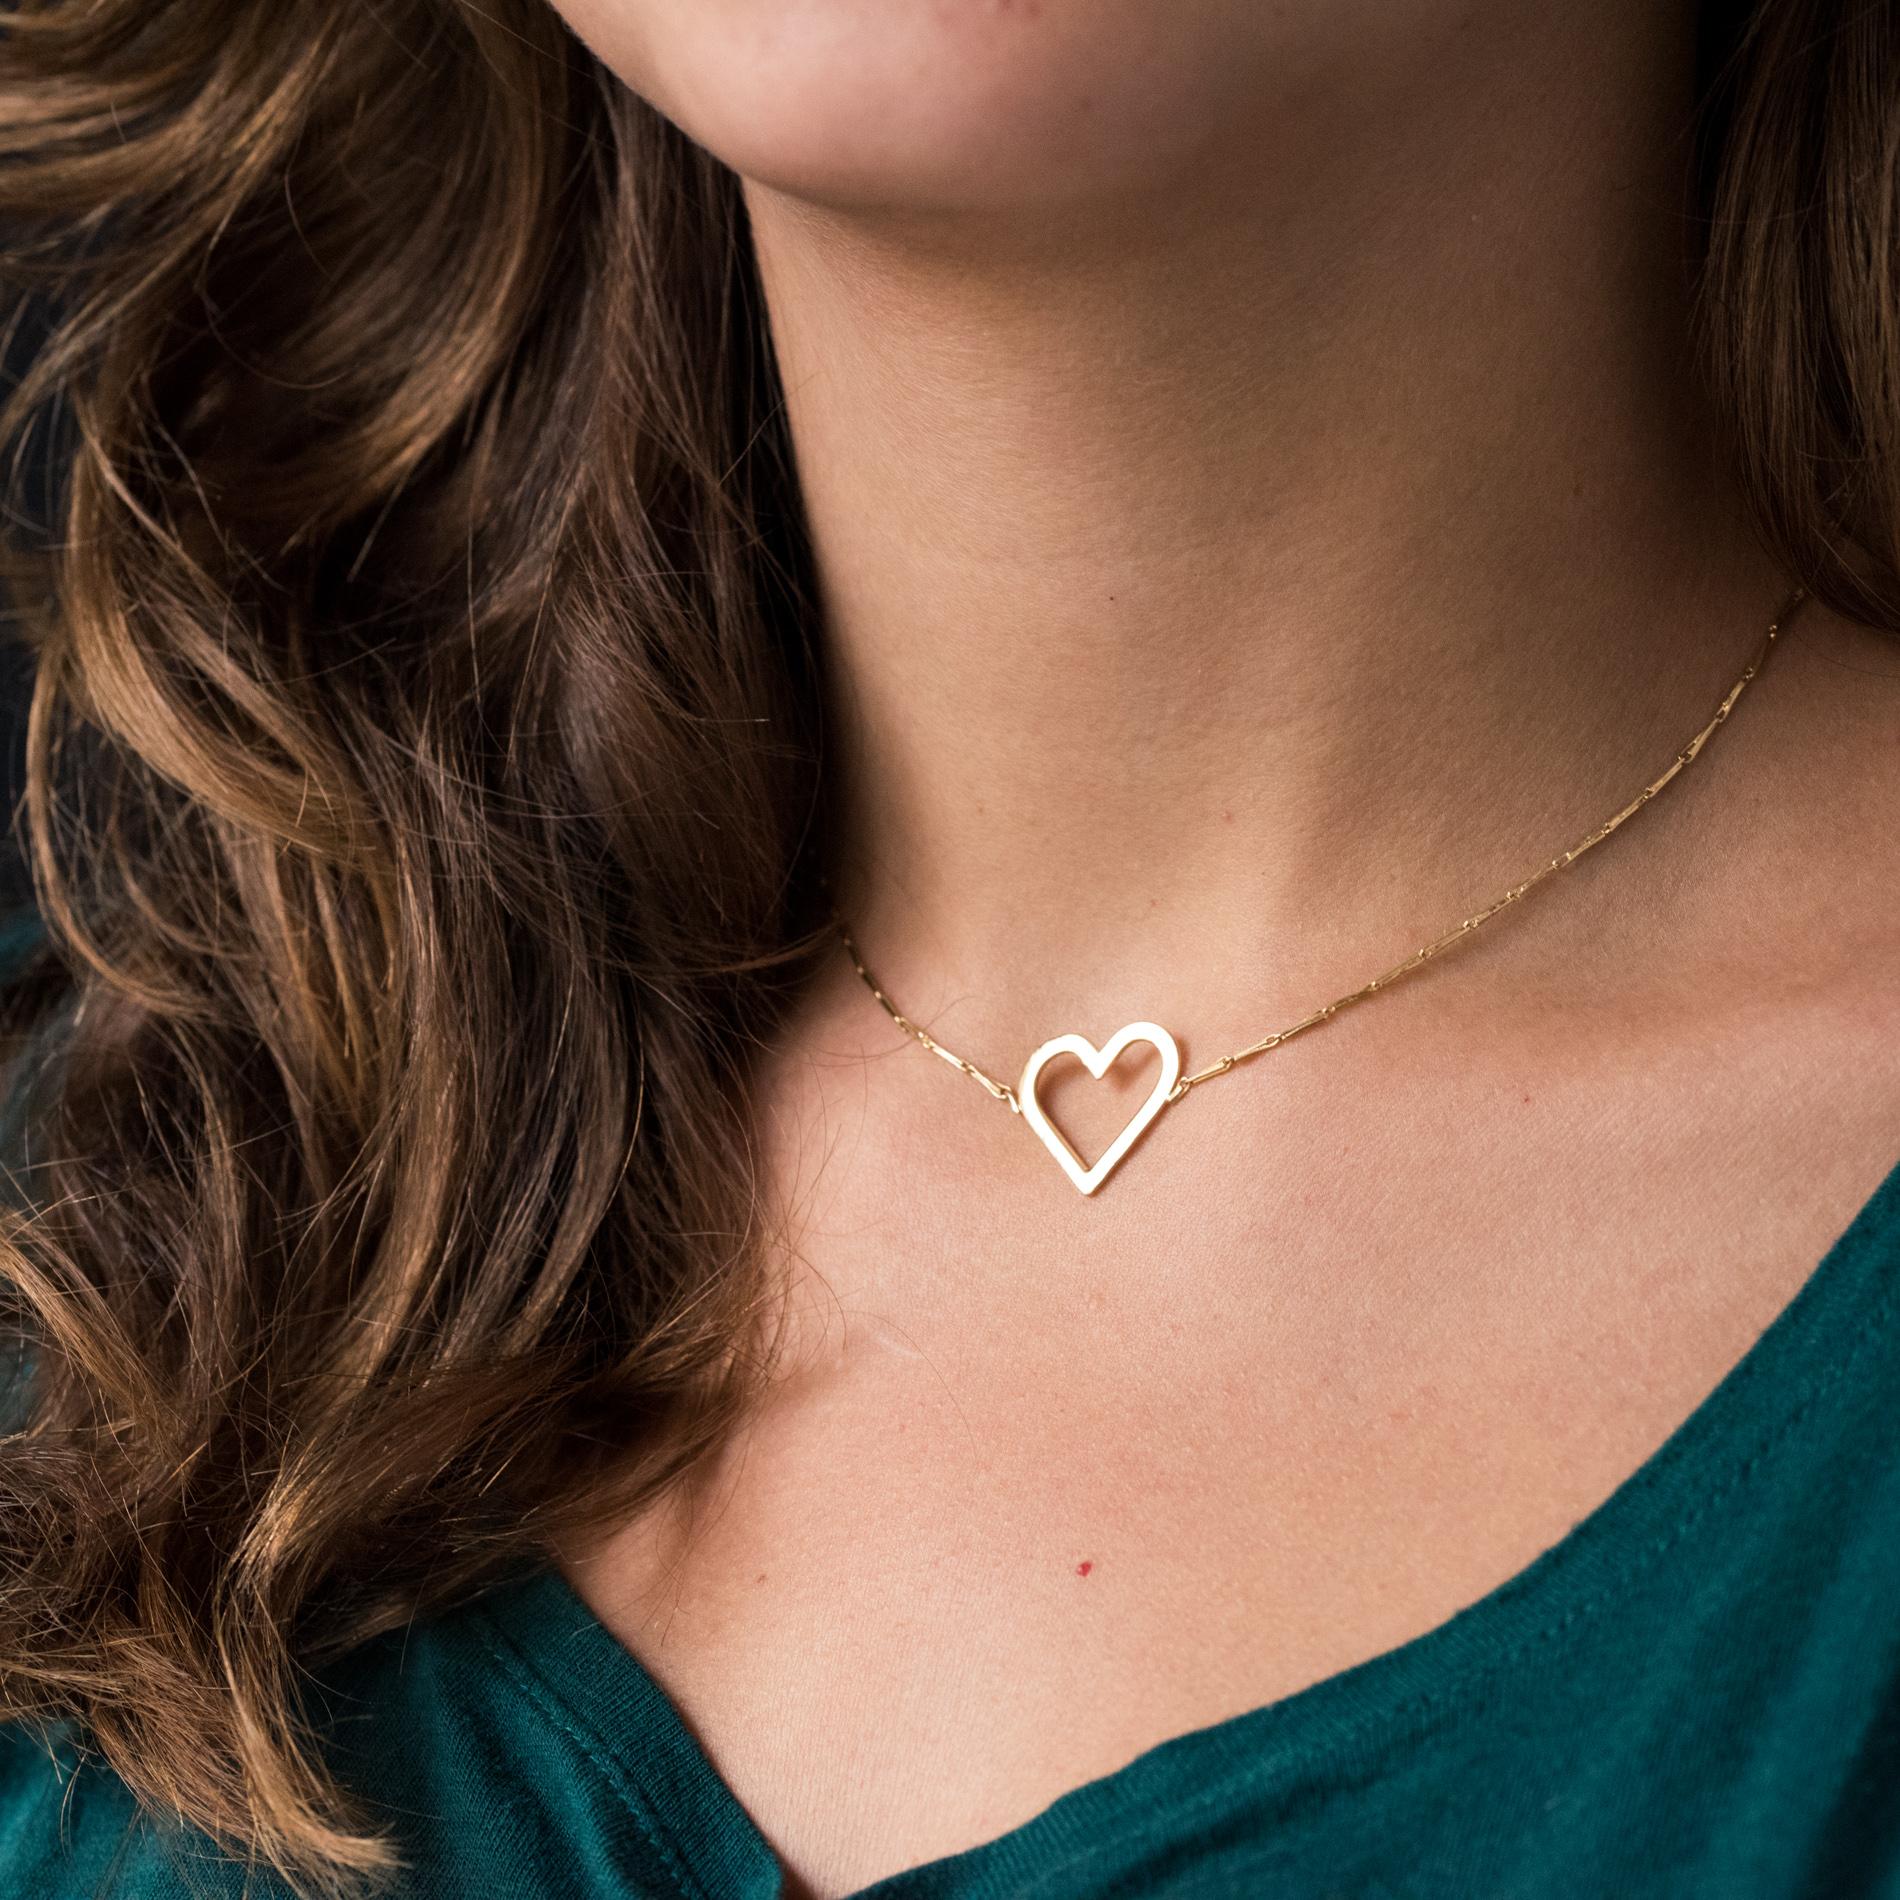 Necklace in 18 karats yellow gold.
Delicate gold necklace it consists of a pendant heart- shaped retained on both sides by a fine chain oat grain mesh. The clasp is a spring ring.
Length of the chain: 38,5 cm, thickness: 0,8mm, height of the motif: